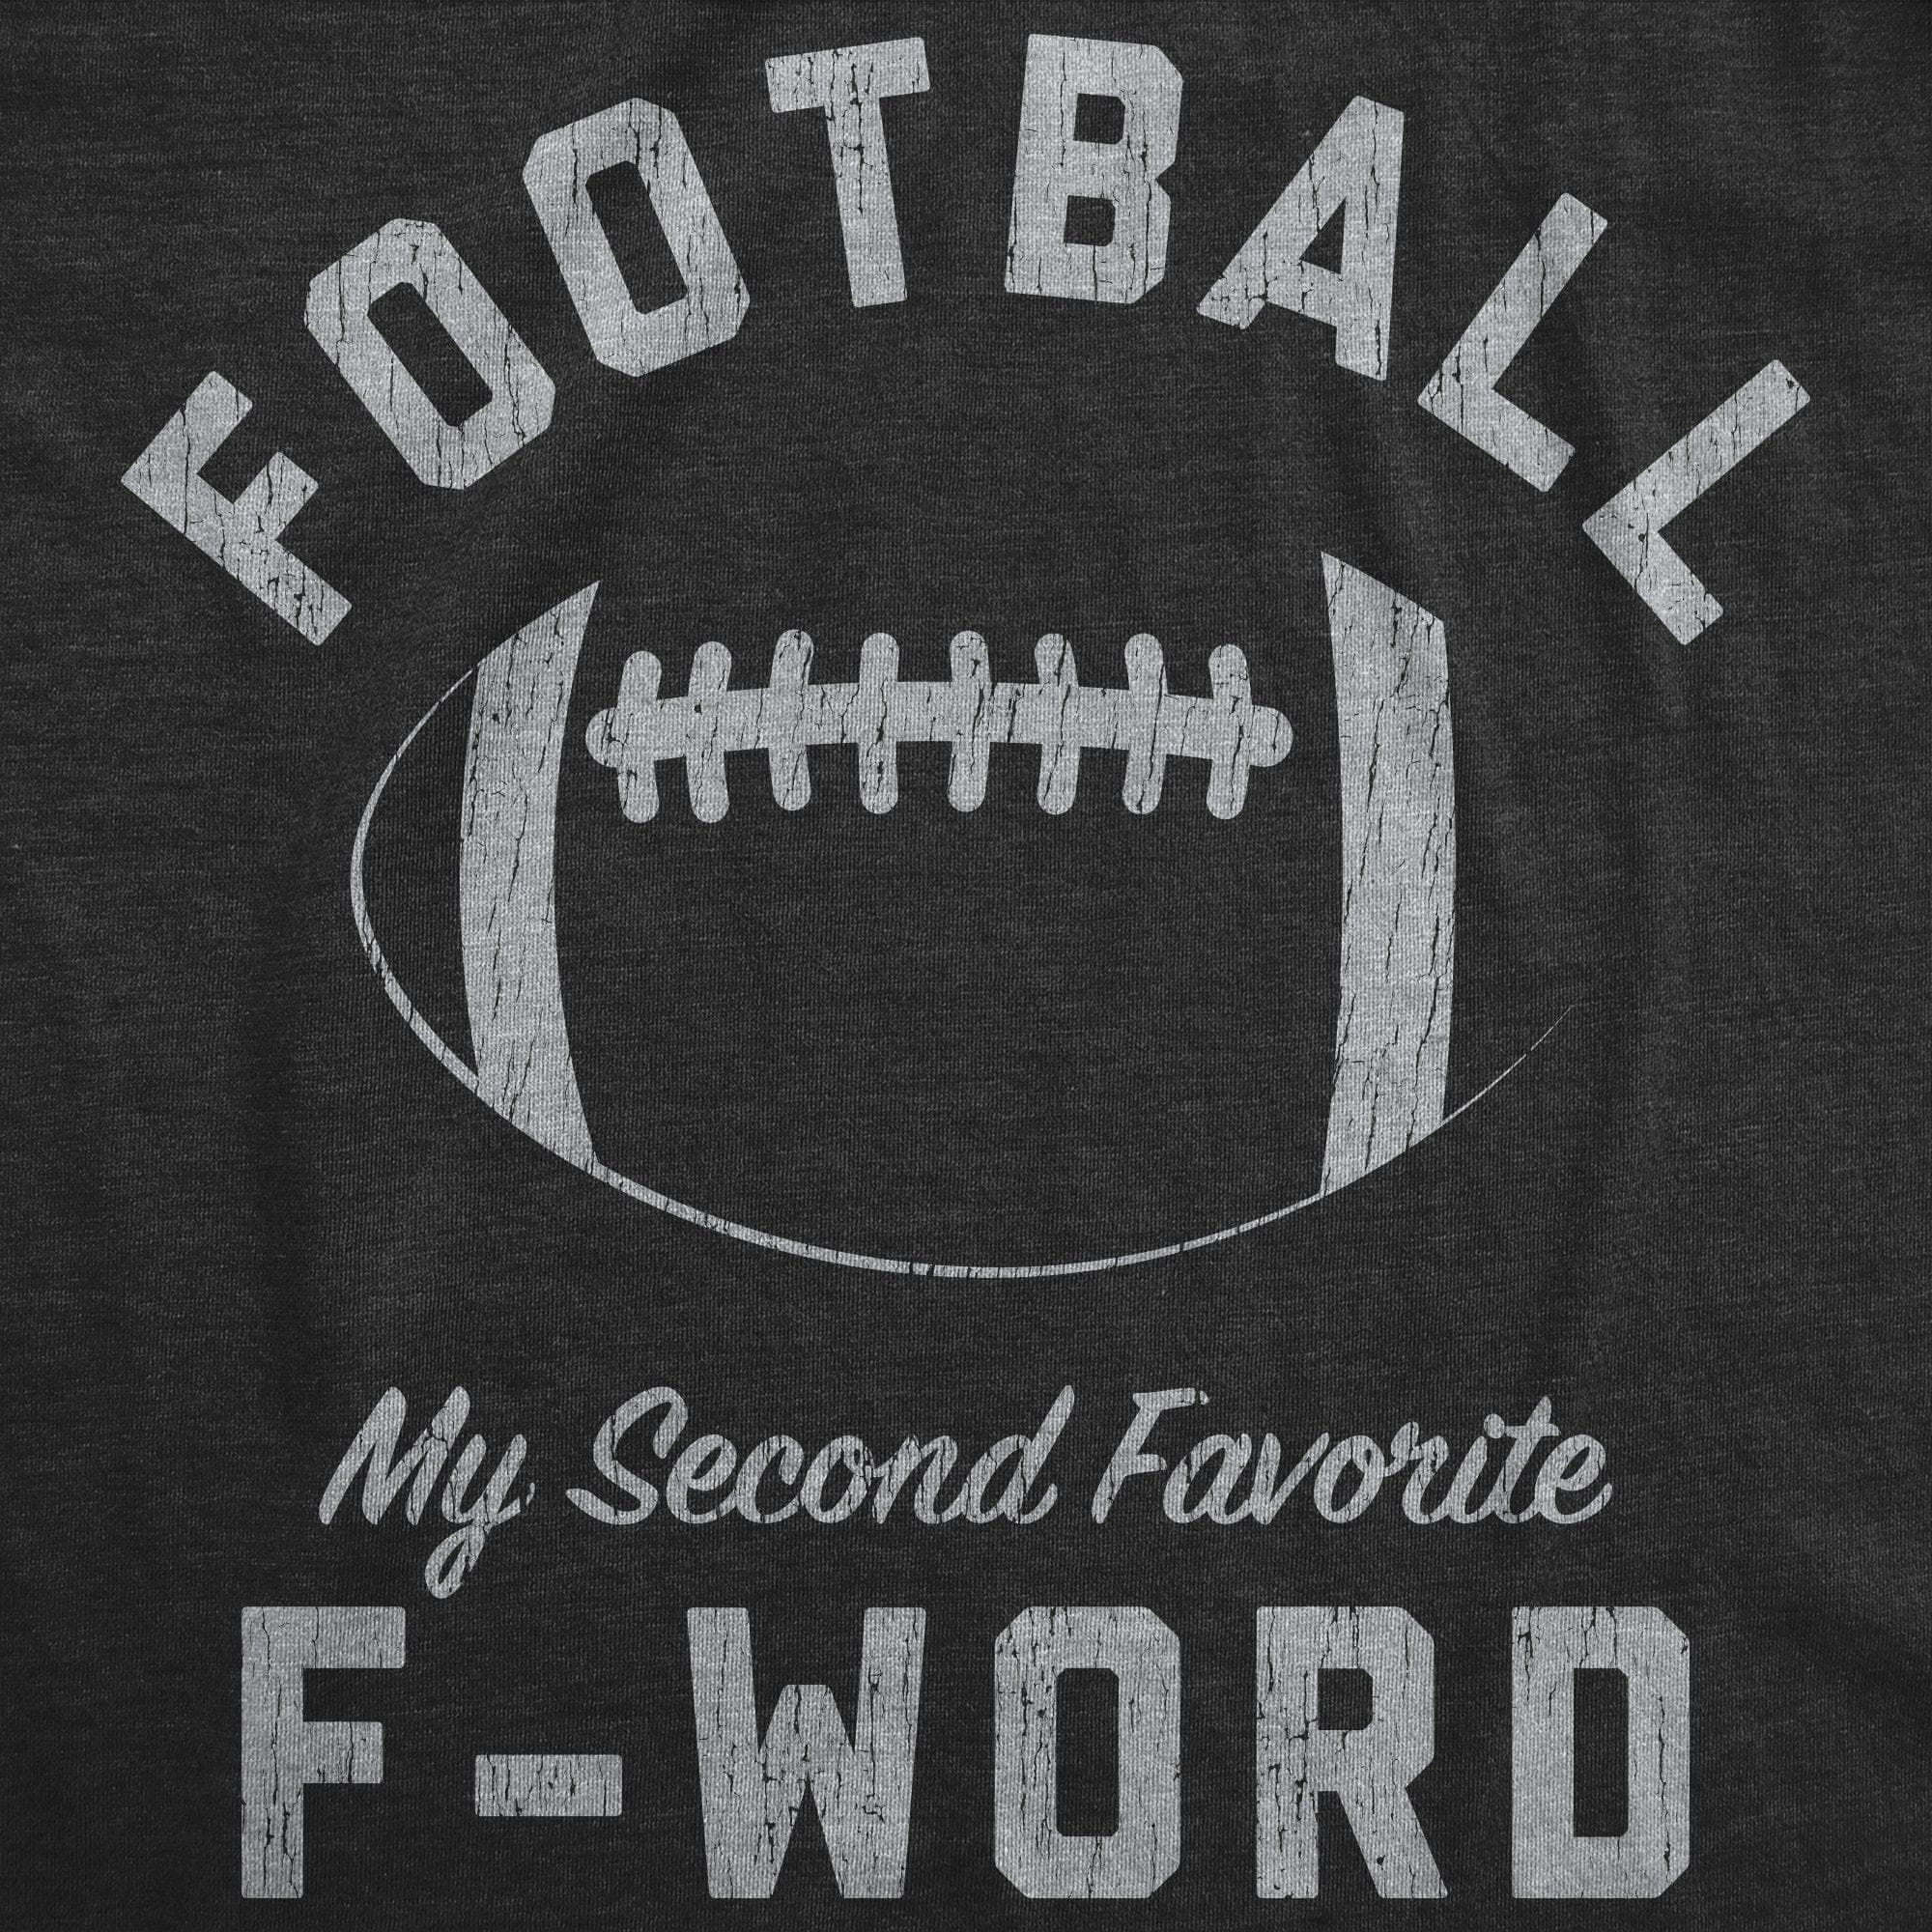 Football Is My Second Favorite F-Word Women's Tshirt - Crazy Dog T-Shirts